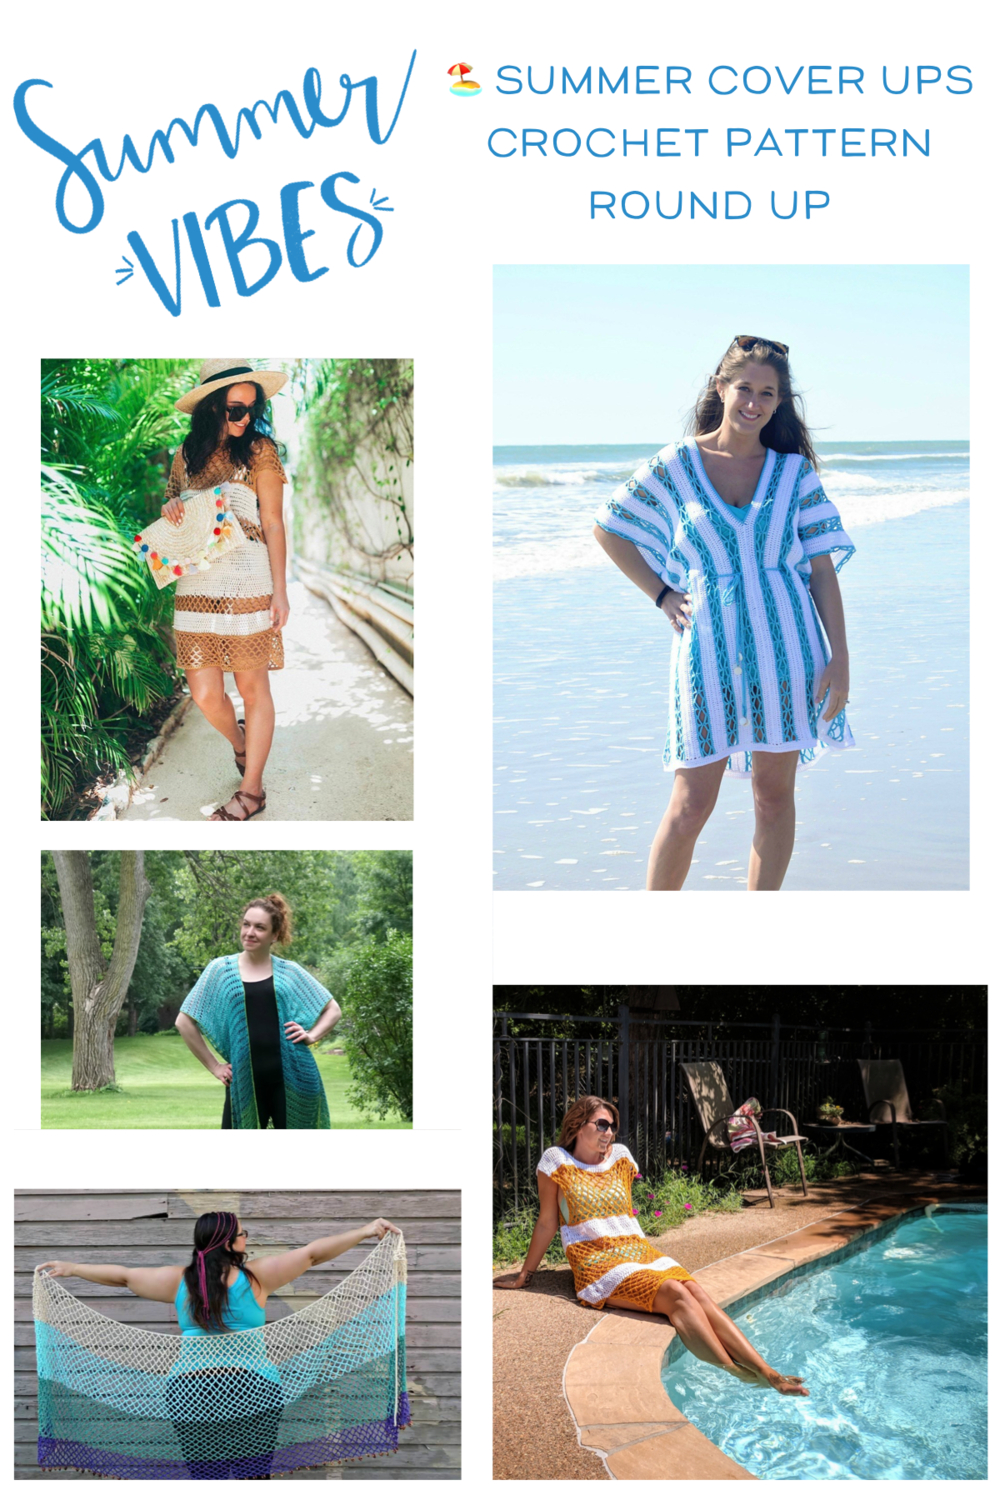 Crochet Beach Cover Up Pattern Beachy Cover Ups Free Crochet Pattern Round Up Stitch Hustle